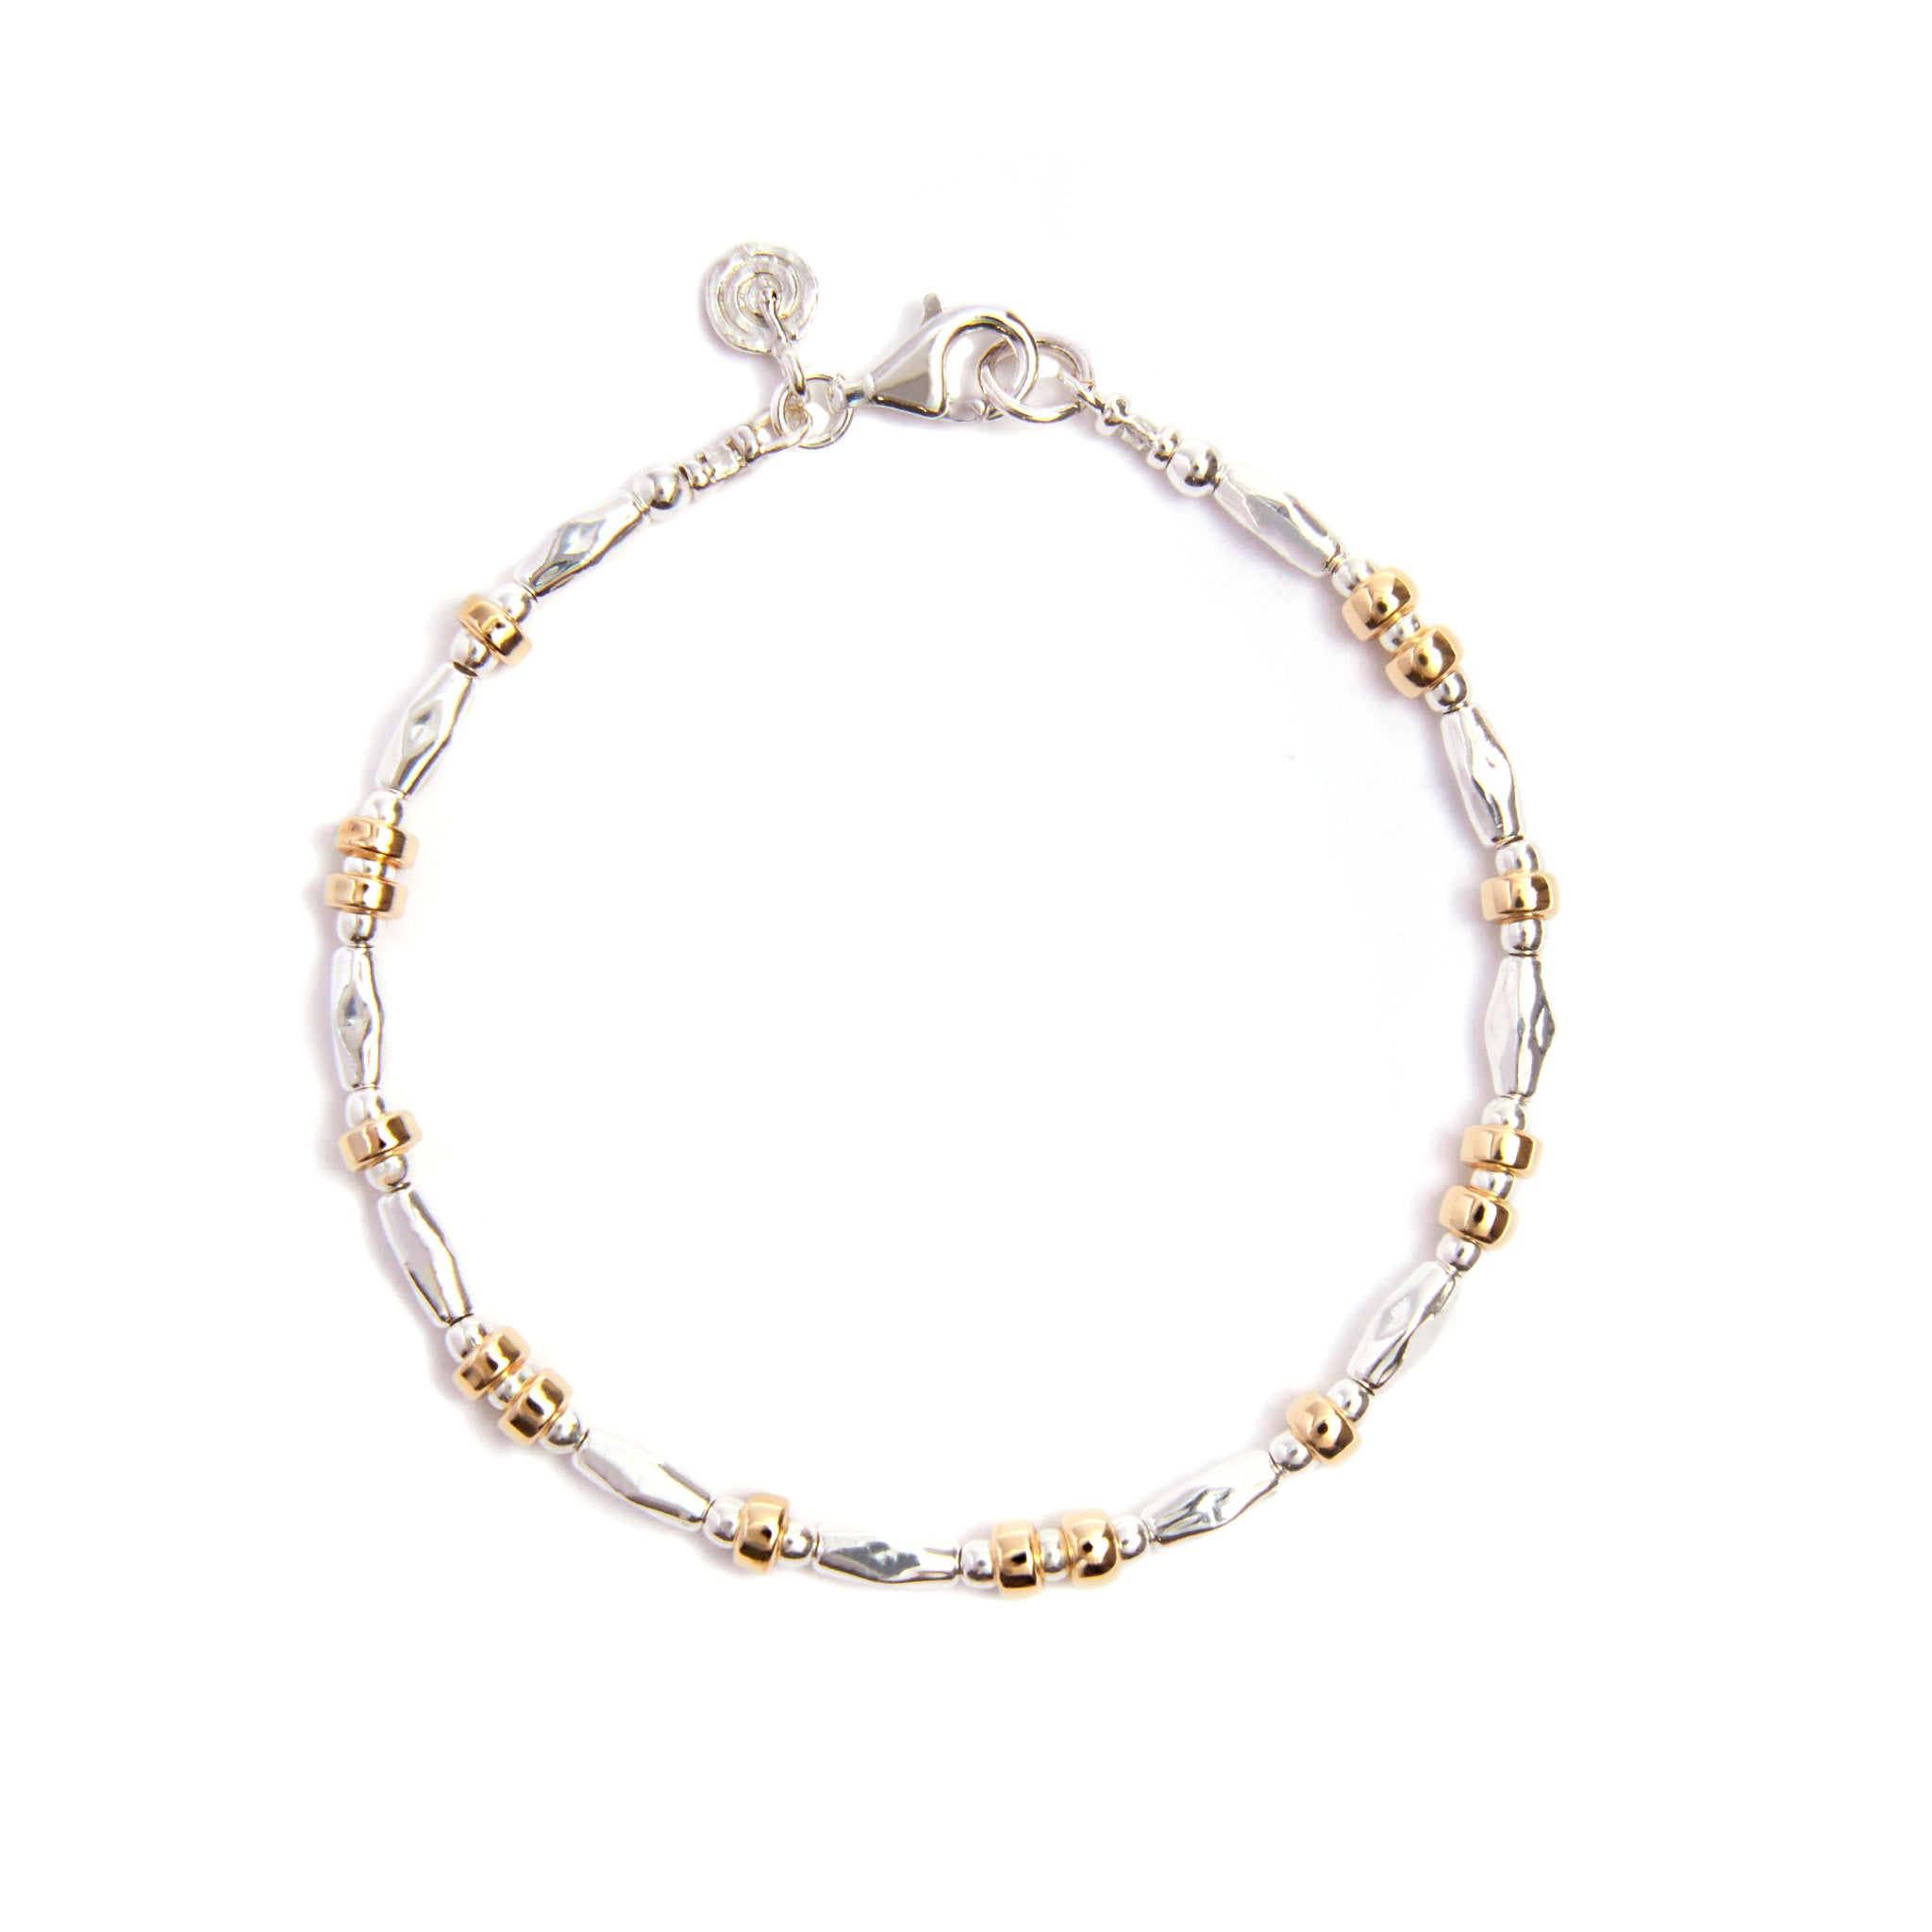 A chic Twisted Elegance Mixed Metal Oval Bracelet crafted from 14ct gold fill, featuring details of twisted oval beads made from sterling silver, adding a touch of sophistication to any look.